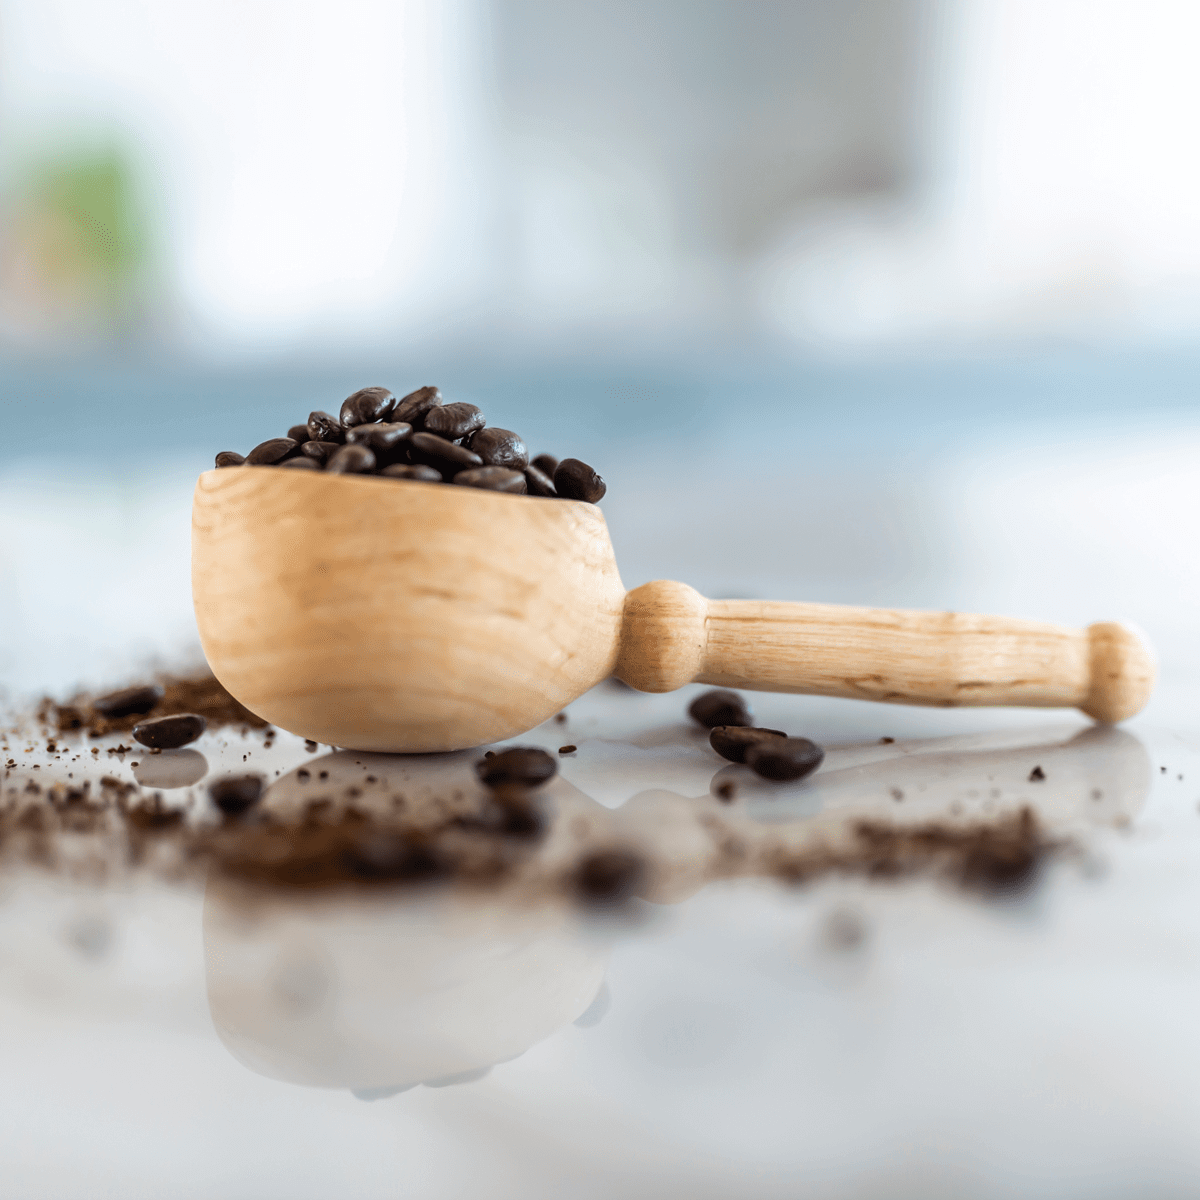 Hand Carved Wooden Spoon | Wooden Coffee Scoop hand-carved by Artisans